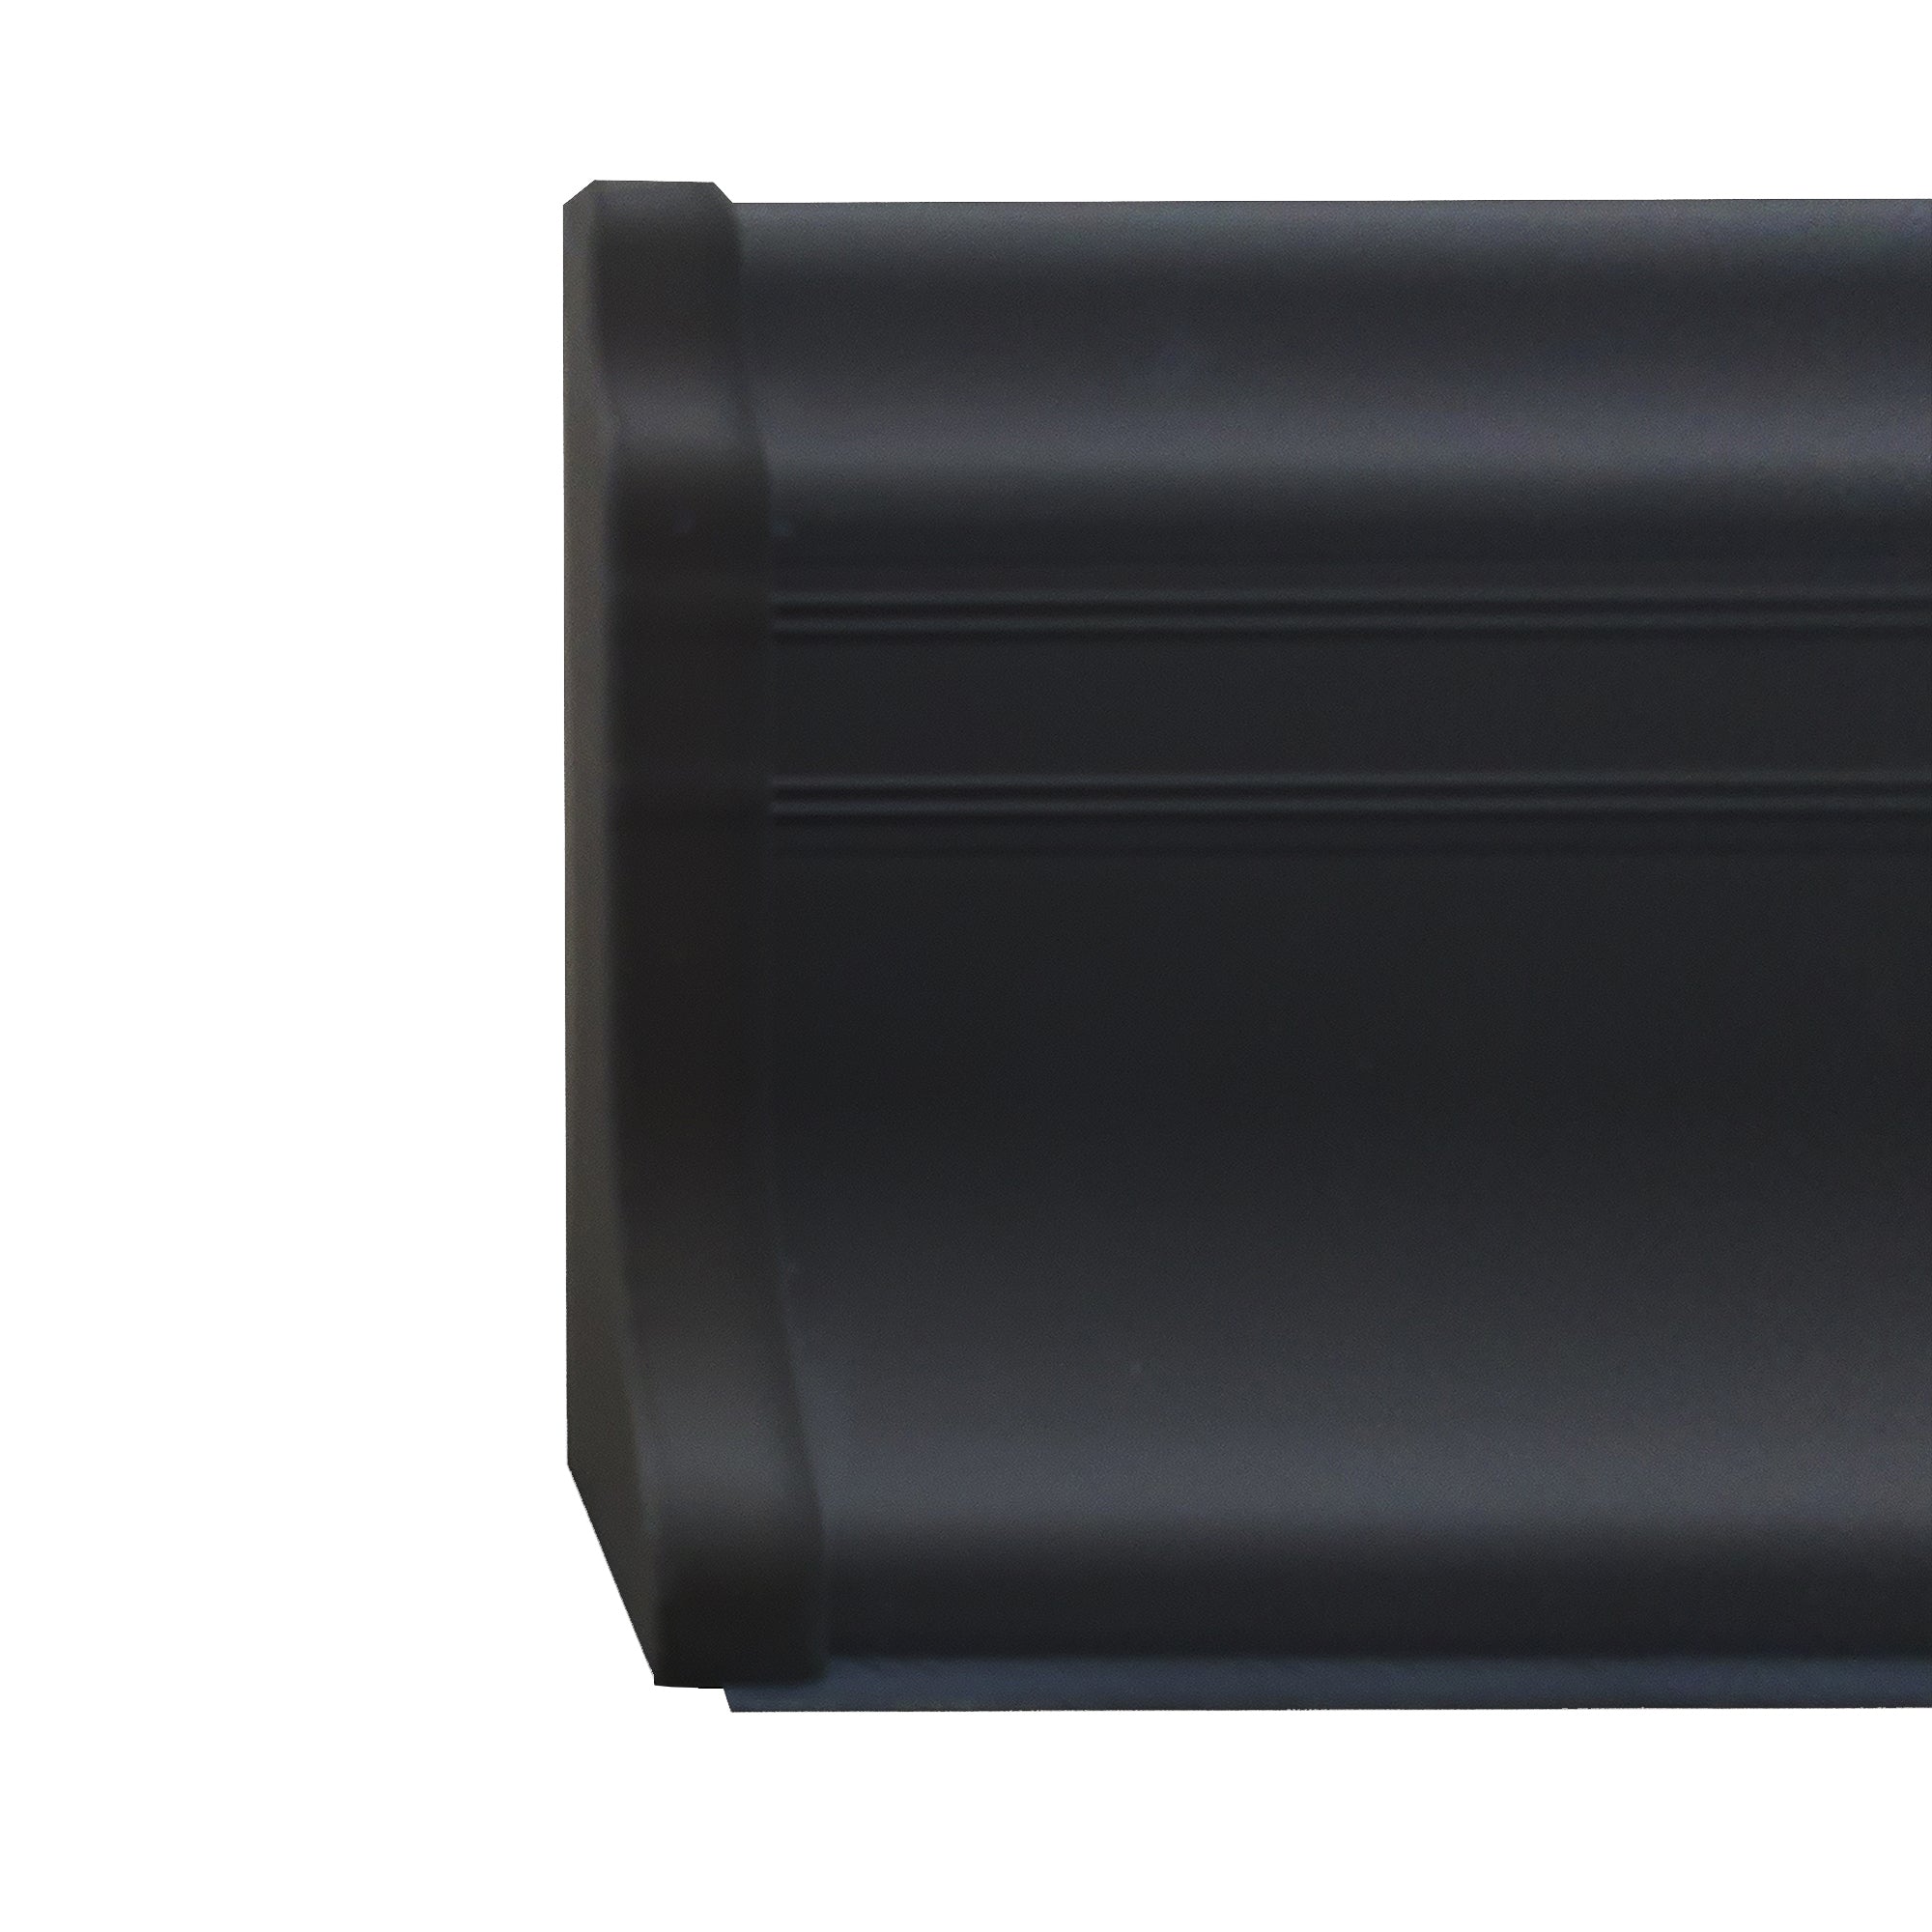 95mm KMS PVC Skirting Accessories